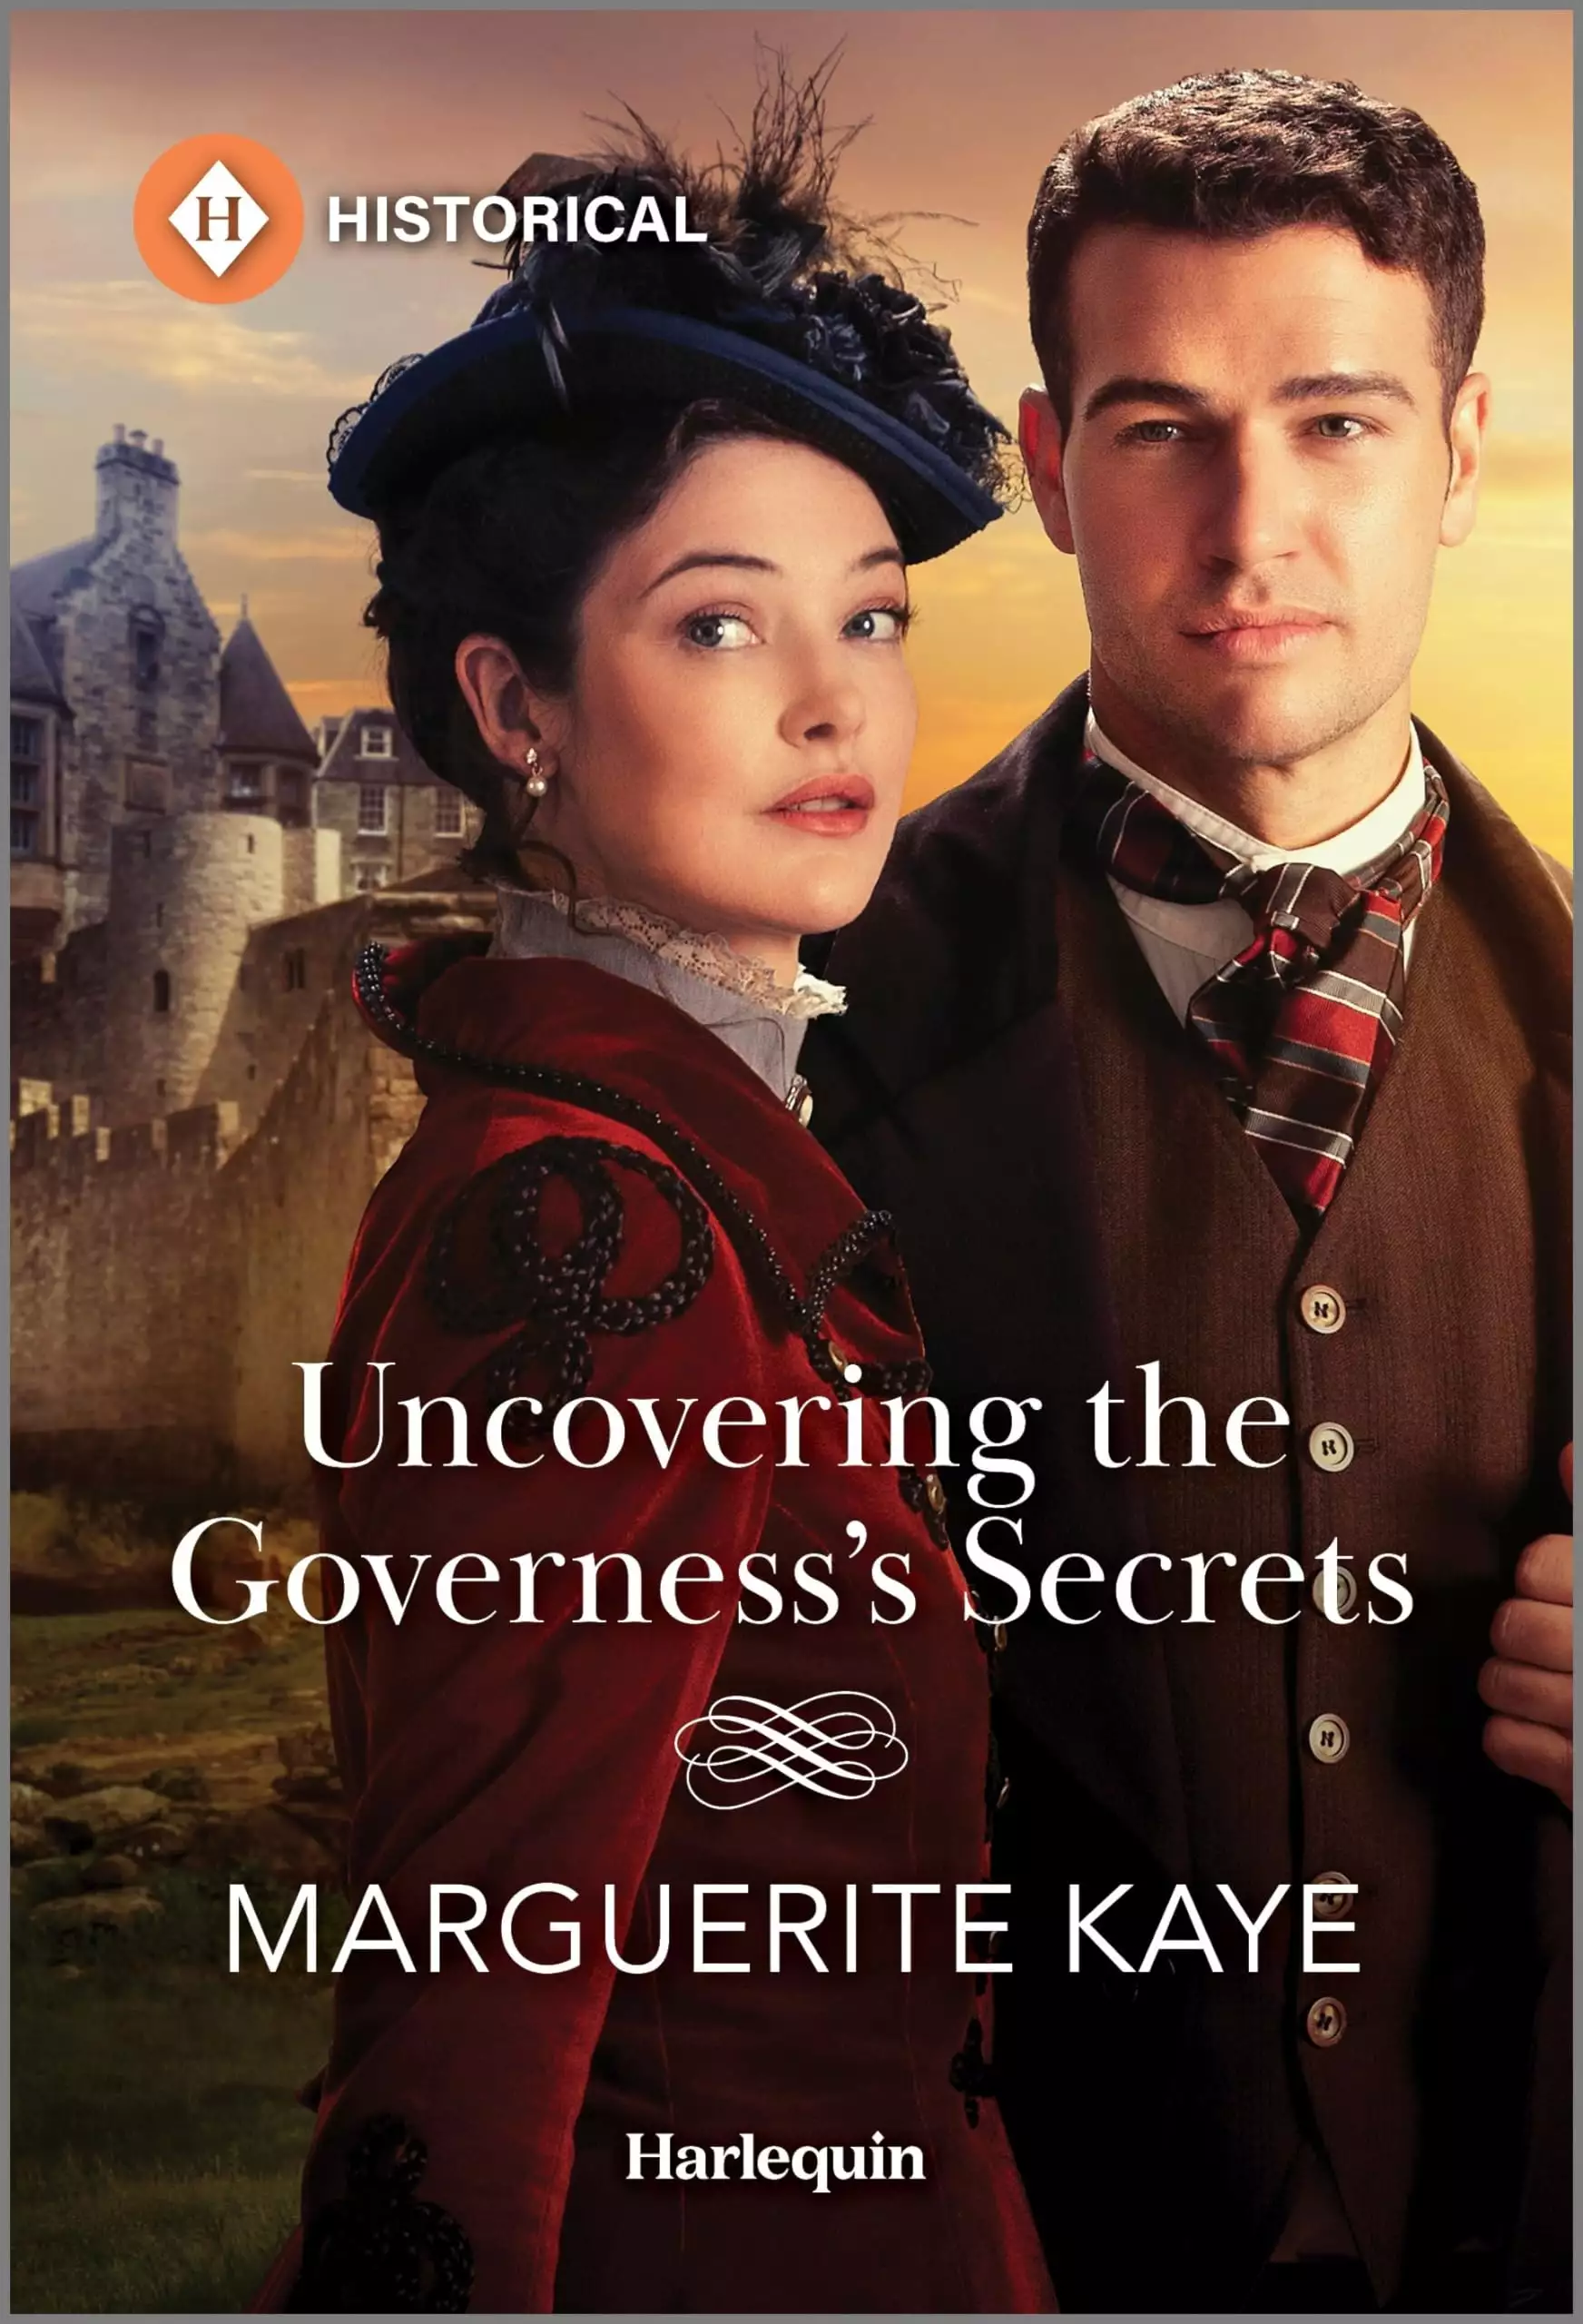 Uncovering the Governess's Secrets